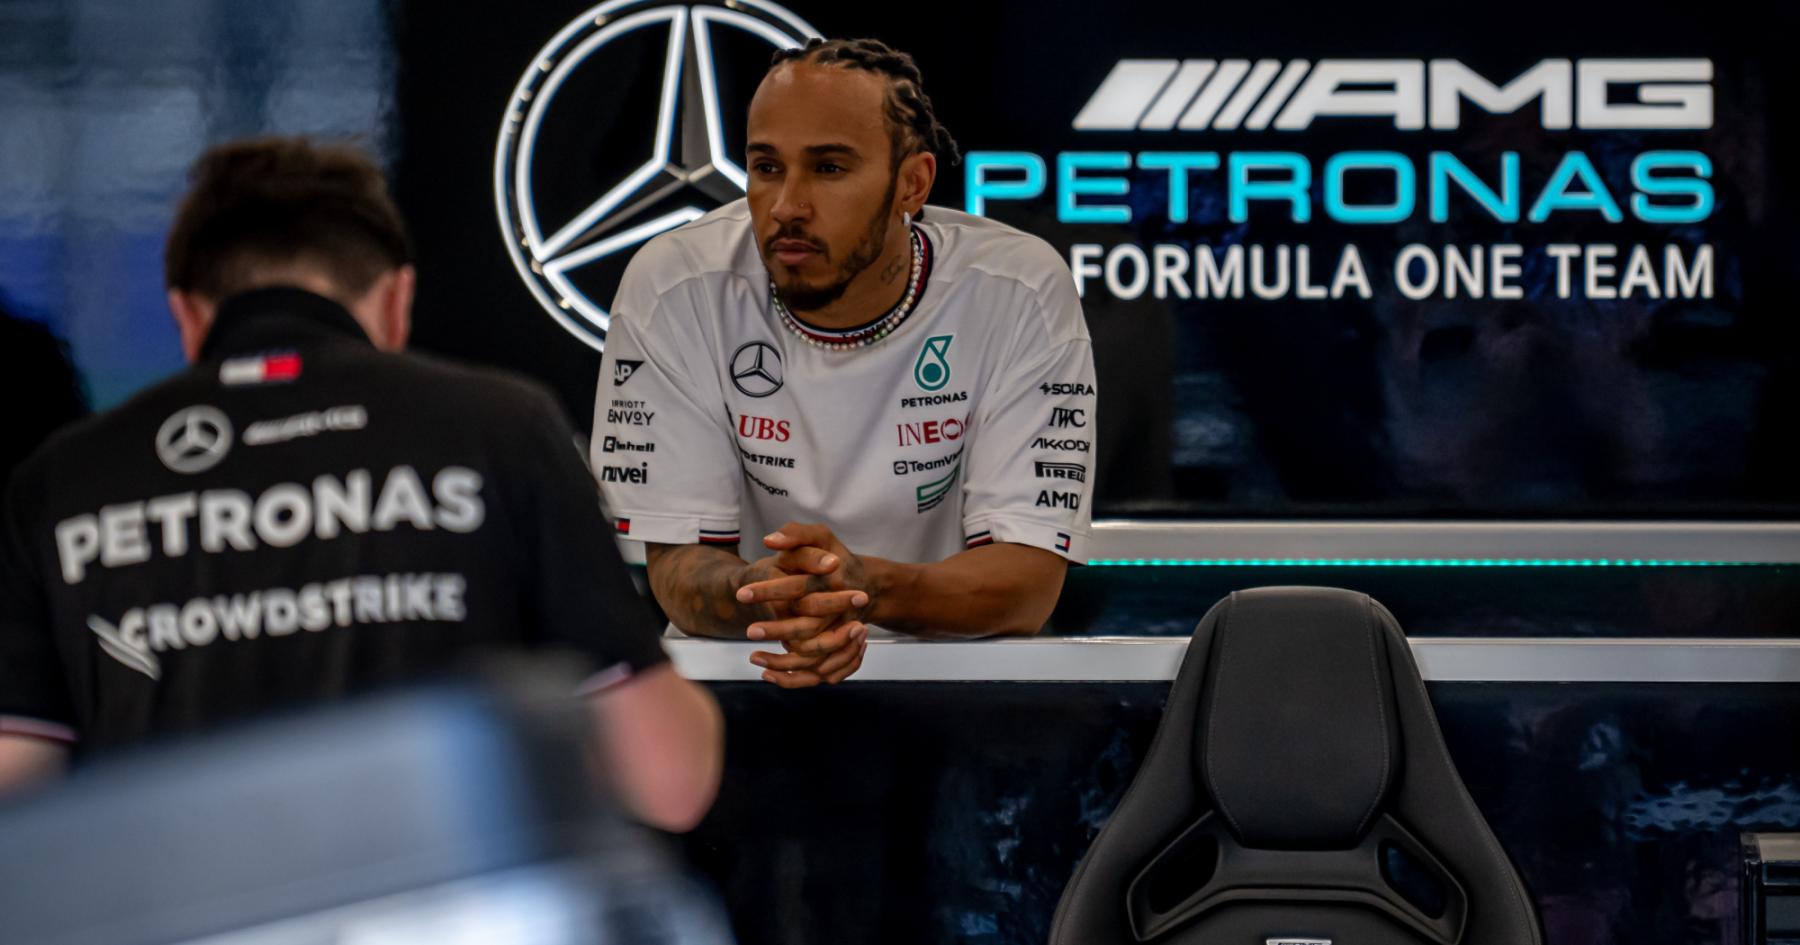 Hamilton Takes The Lead: Champion Clarifies F1 Love Stance Amidst Off-Track Concerns